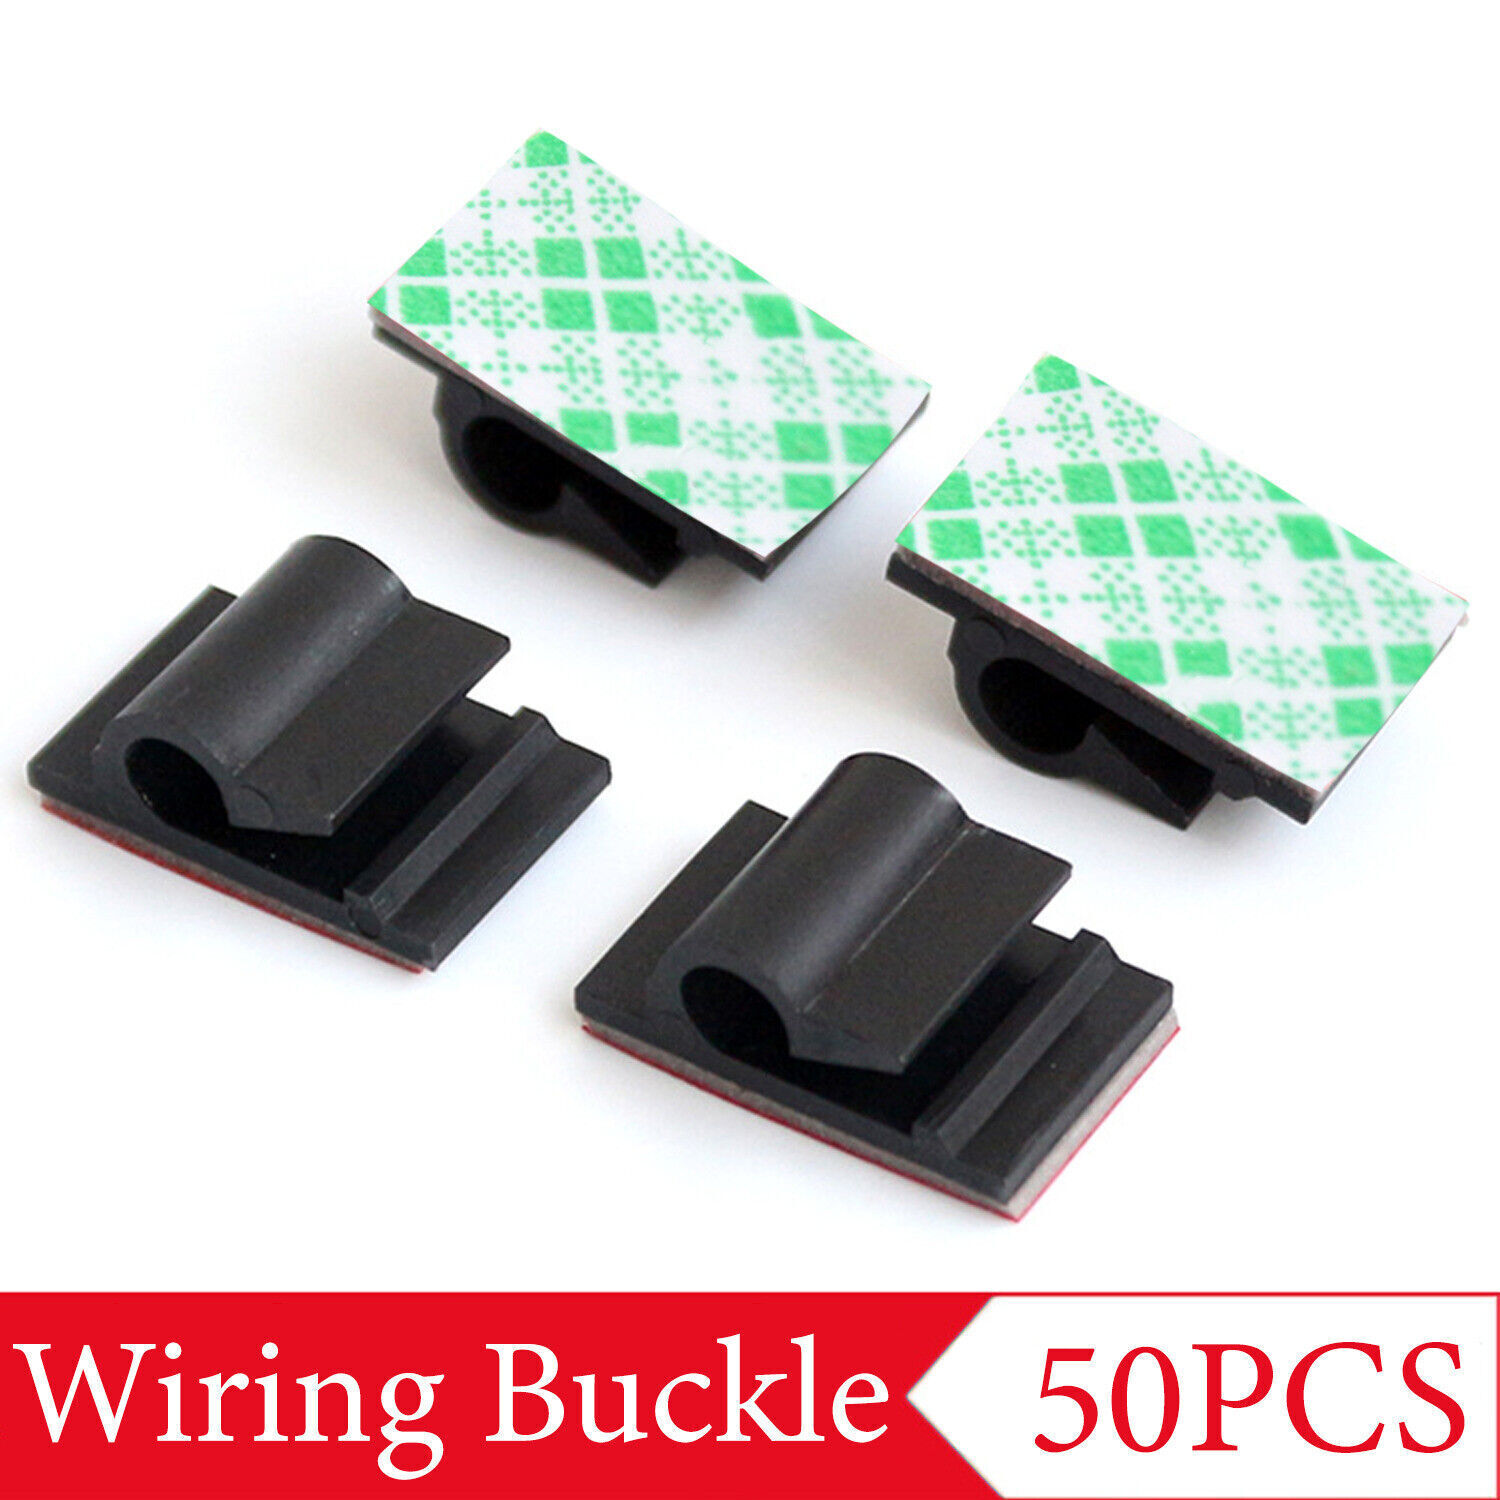 50Pcs Cable Clips Self-Adhesive Cord Wire Holder Management Organizer Clamp